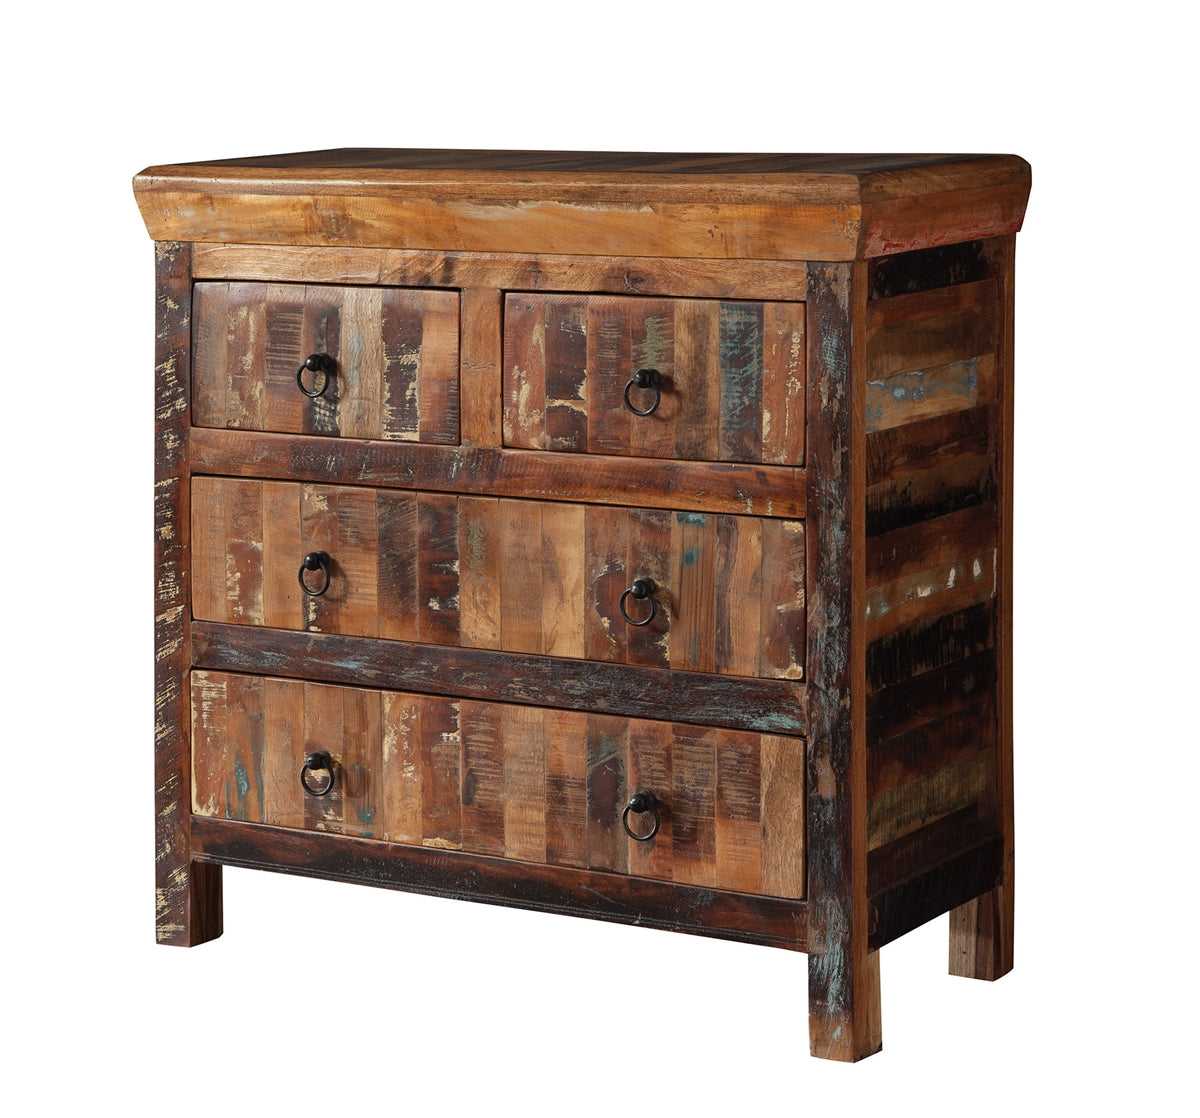 TK Rustic Cabinet in Reclaimed Wood Finish